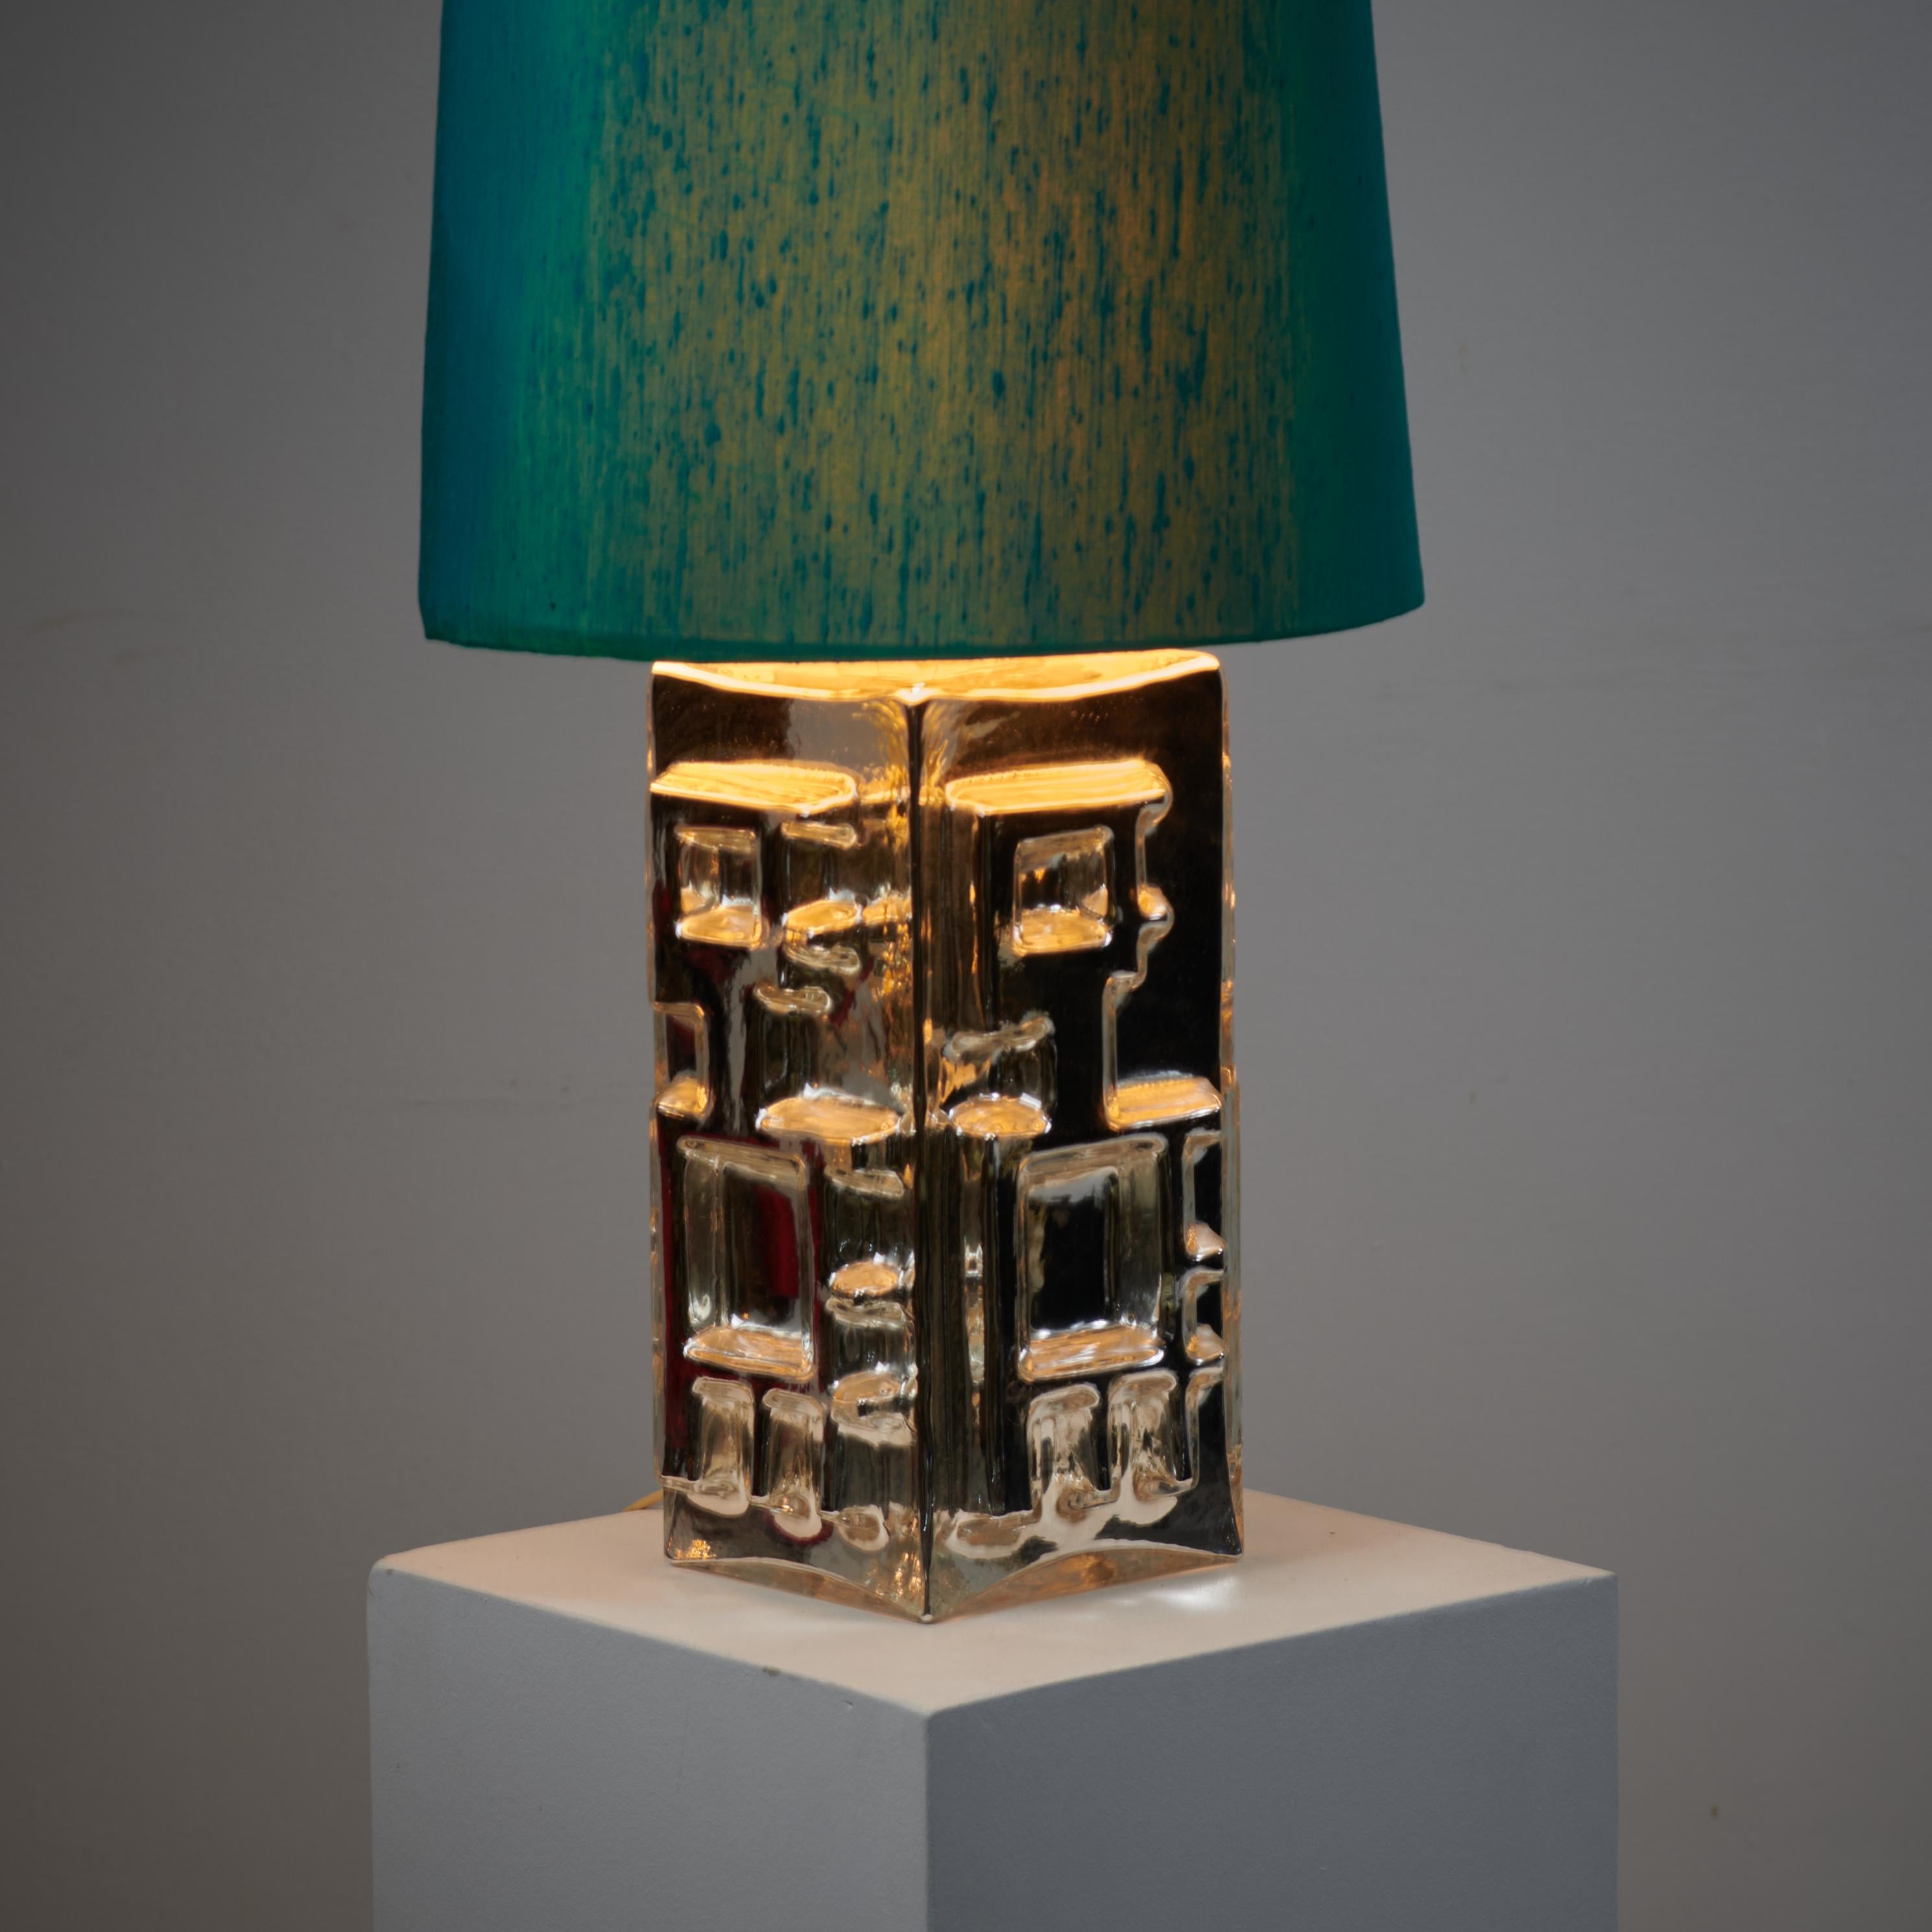 20th Century Vintage Swedish Modern Square Glass Table Lamp with Original Green Shade For Sale